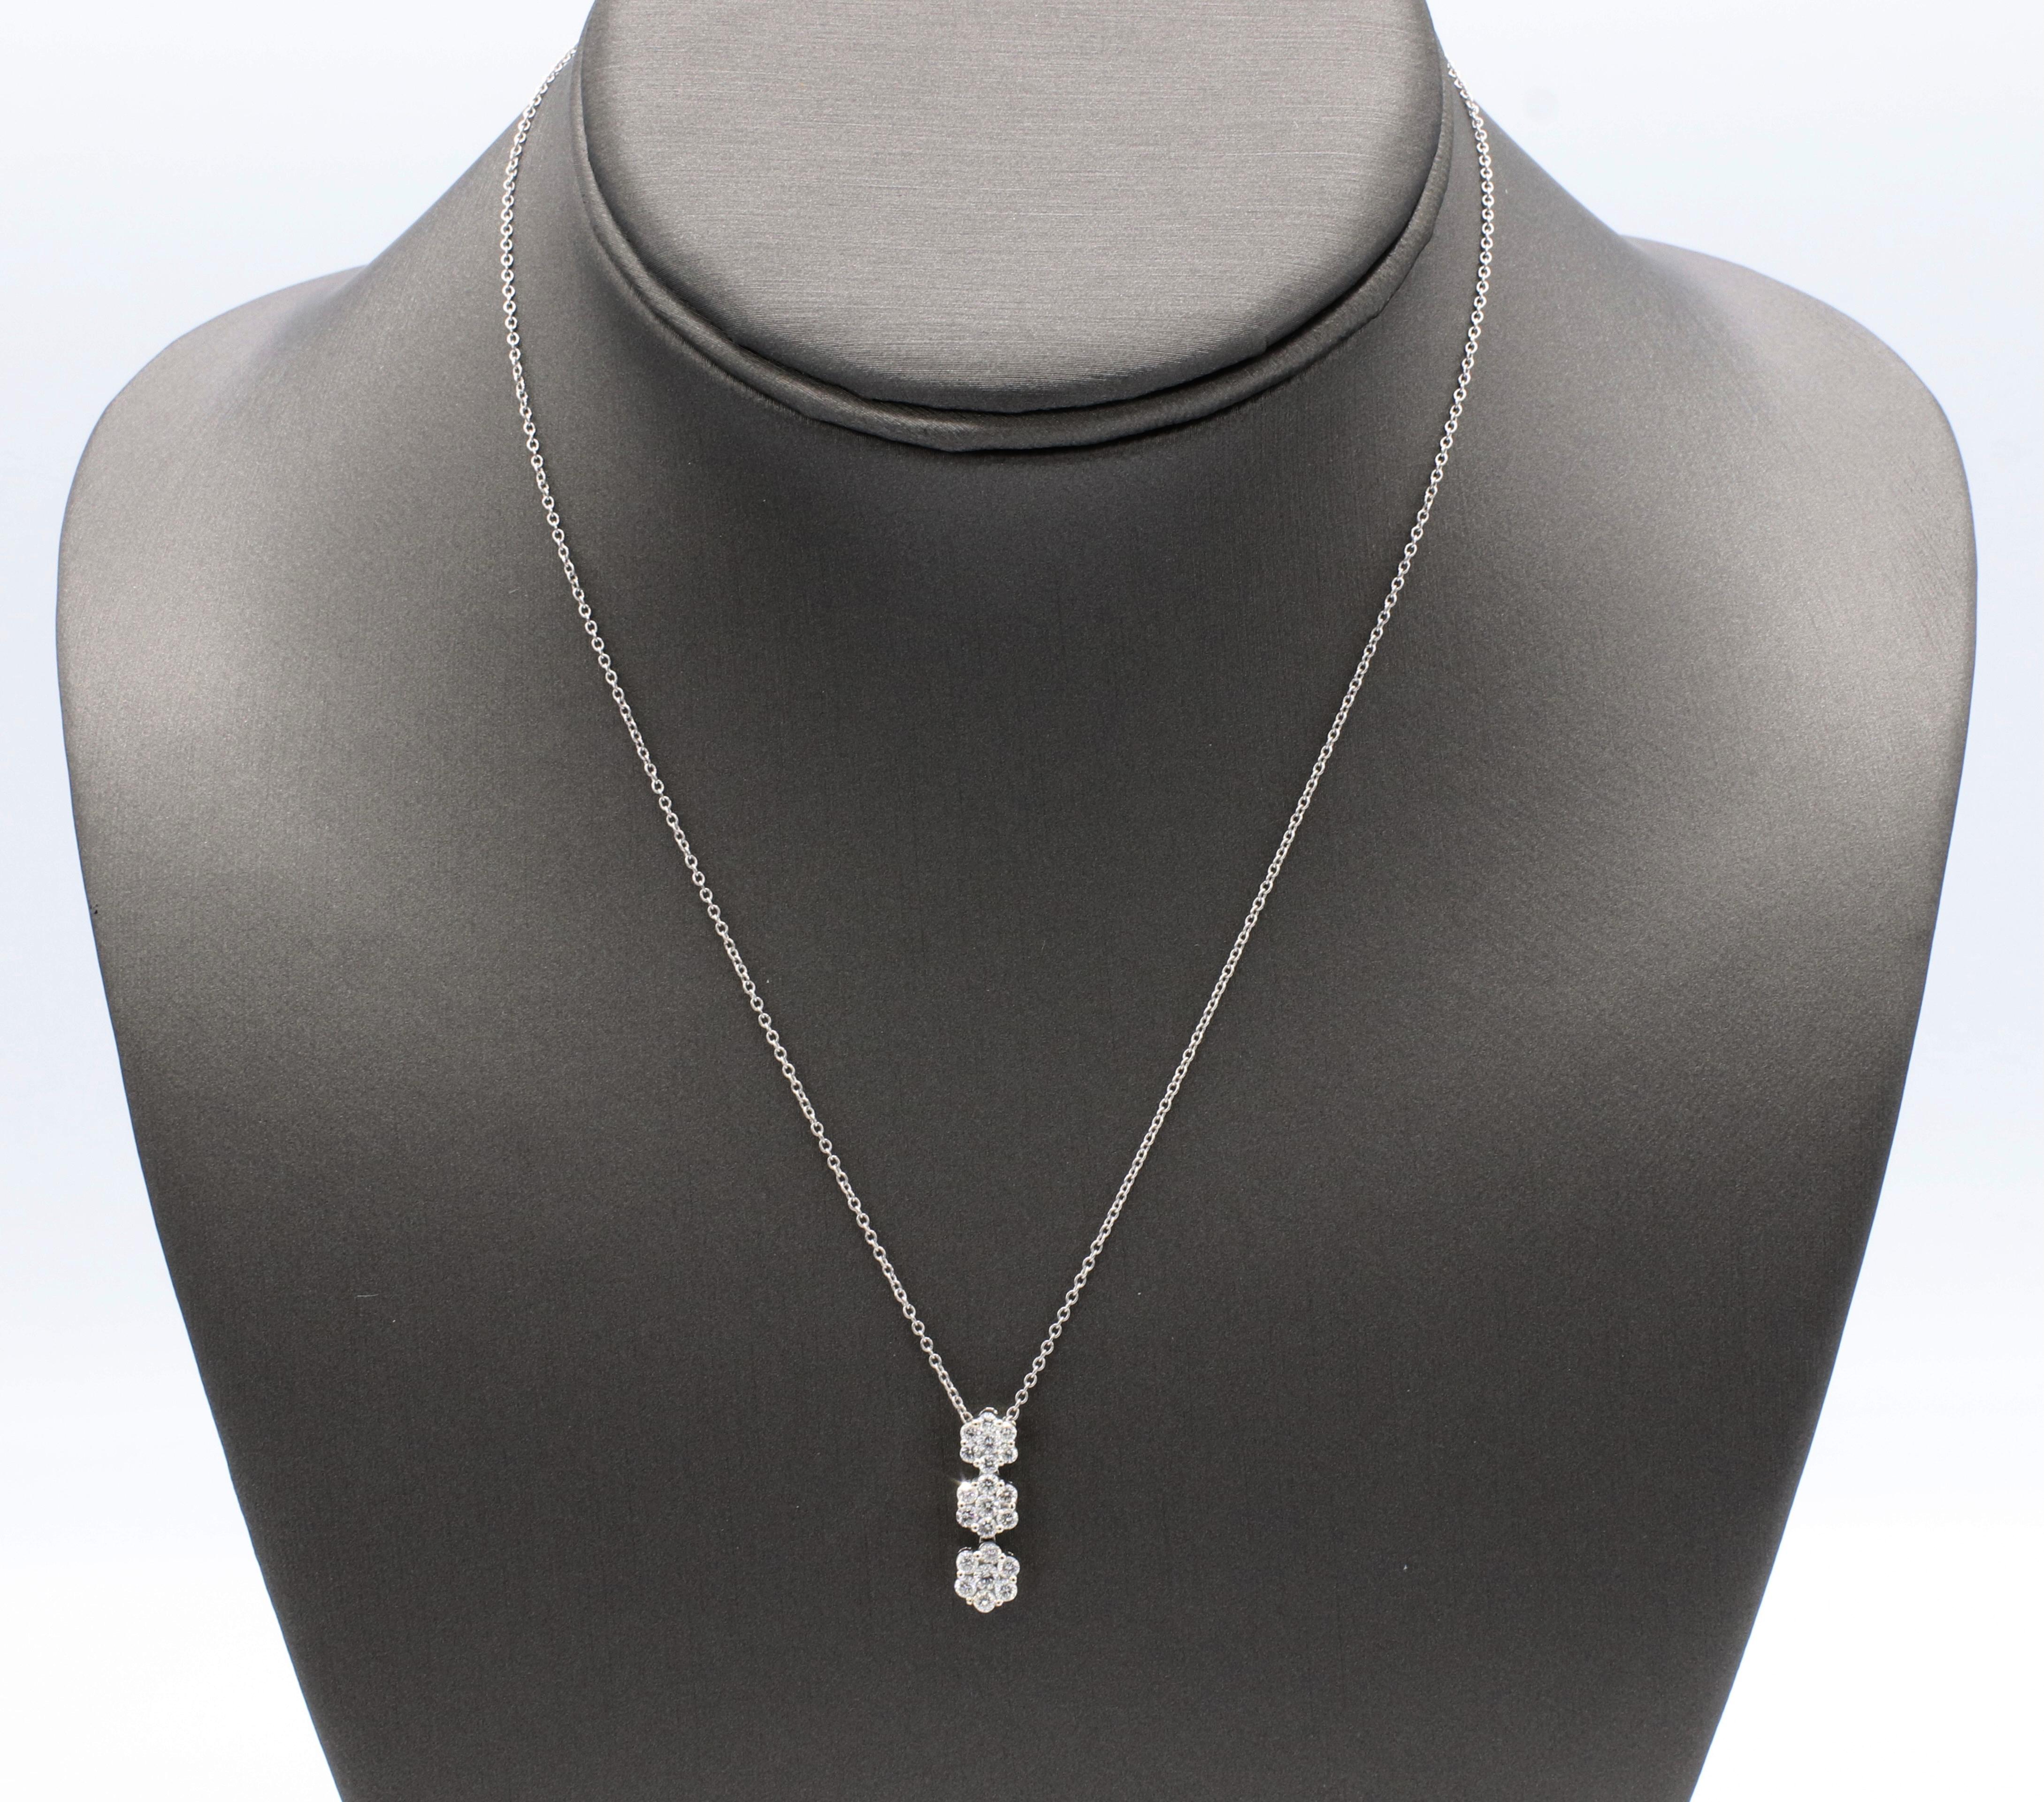 18 Karat White Gold .65 CTW Diamond Cluster Drop Pendant Necklace 16 inches 
Metal: 18k white gold, chain is 14k 
Weight: 2.71 grams 
Diamonds: Approx. .65 CTW G VS-SI 
Chain length: 16 inches 
Pendant length: 17.5MM
